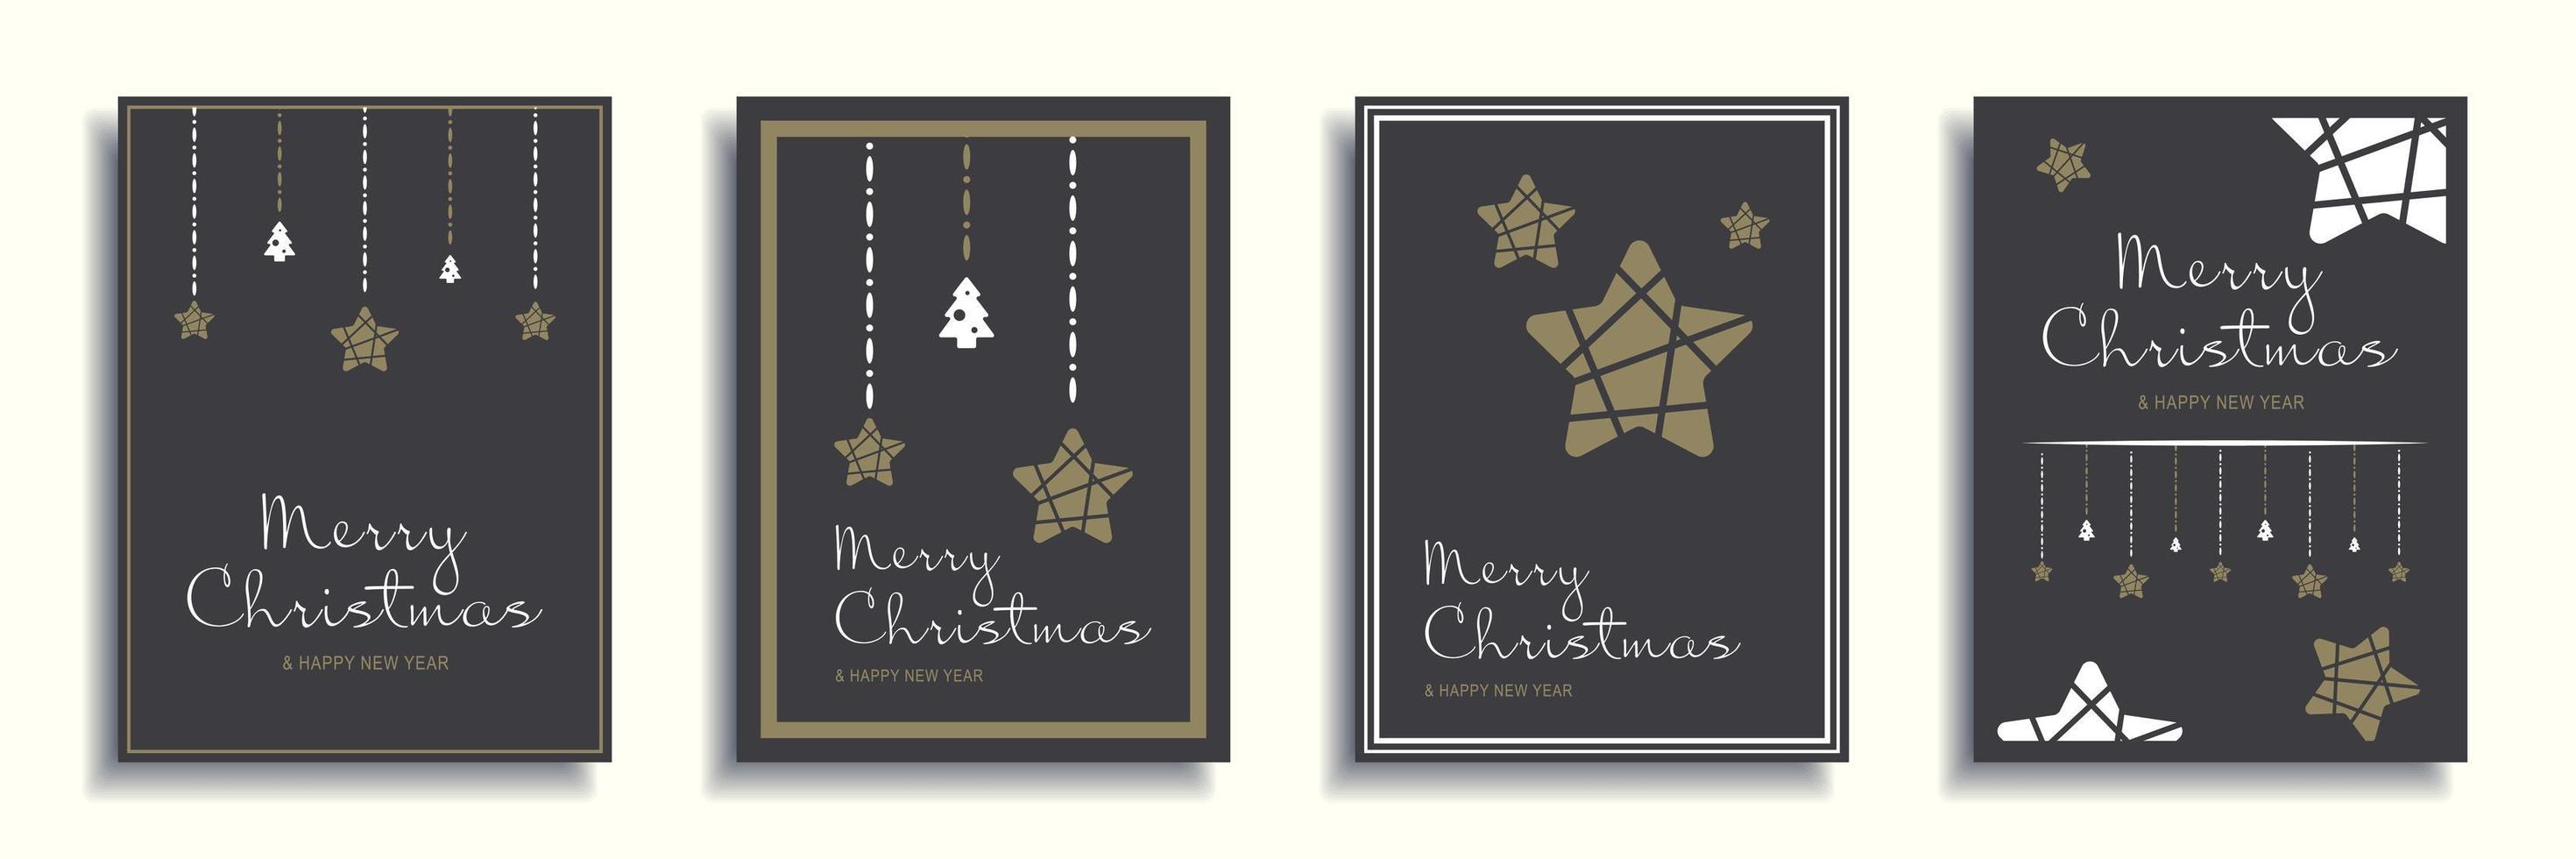 Merry Christmas and New Year 2022 brochure covers set. Xmas minimal banner design with hanging stars and festive trees at dark background. Vector illustration for flyer, poster or greeting card